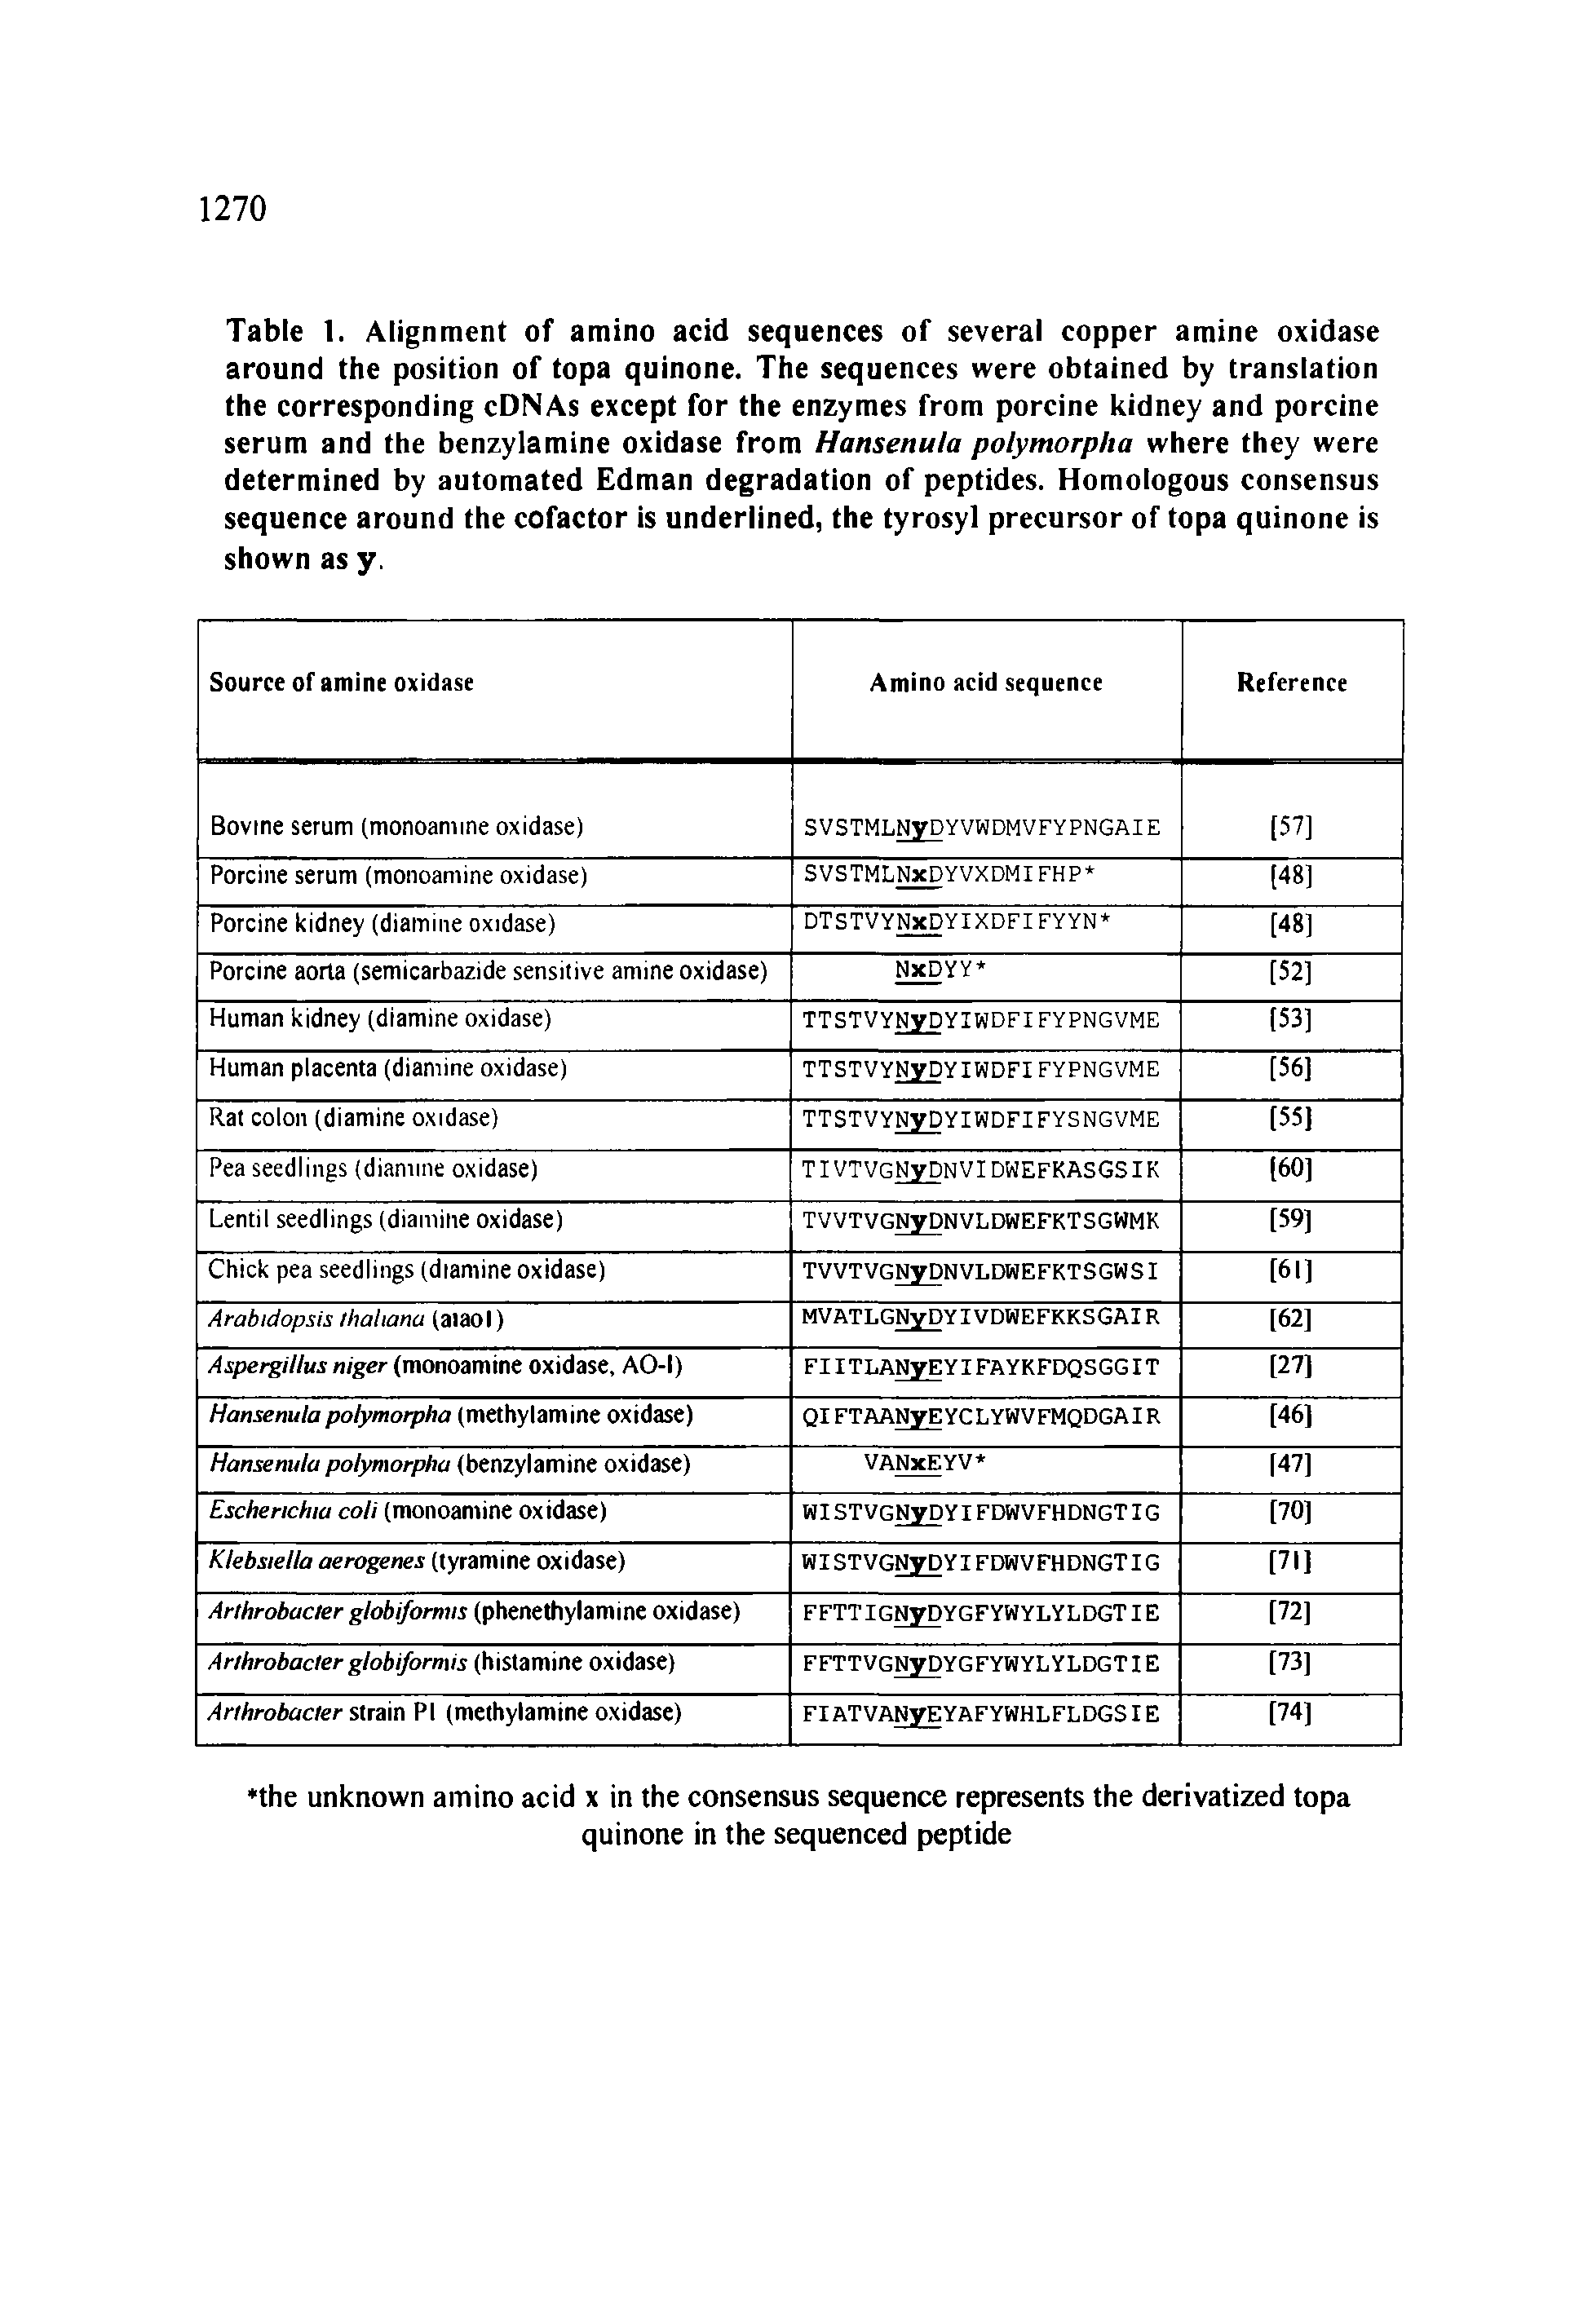 Table 1. Alignment of amino acid sequences of several copper amine oxidase around the position of topa quinone. The sequences were obtained by translation the corresponding cDNAs except for the enzymes from porcine kidney and porcine serum and the benzylamine oxidase from Hansenula polymorpha where they were determined by automated Edman degradation of peptides. Homologous consensus sequence around the cofactor is underlined, the tyrosyl precursor of topa quinone is shown as y.